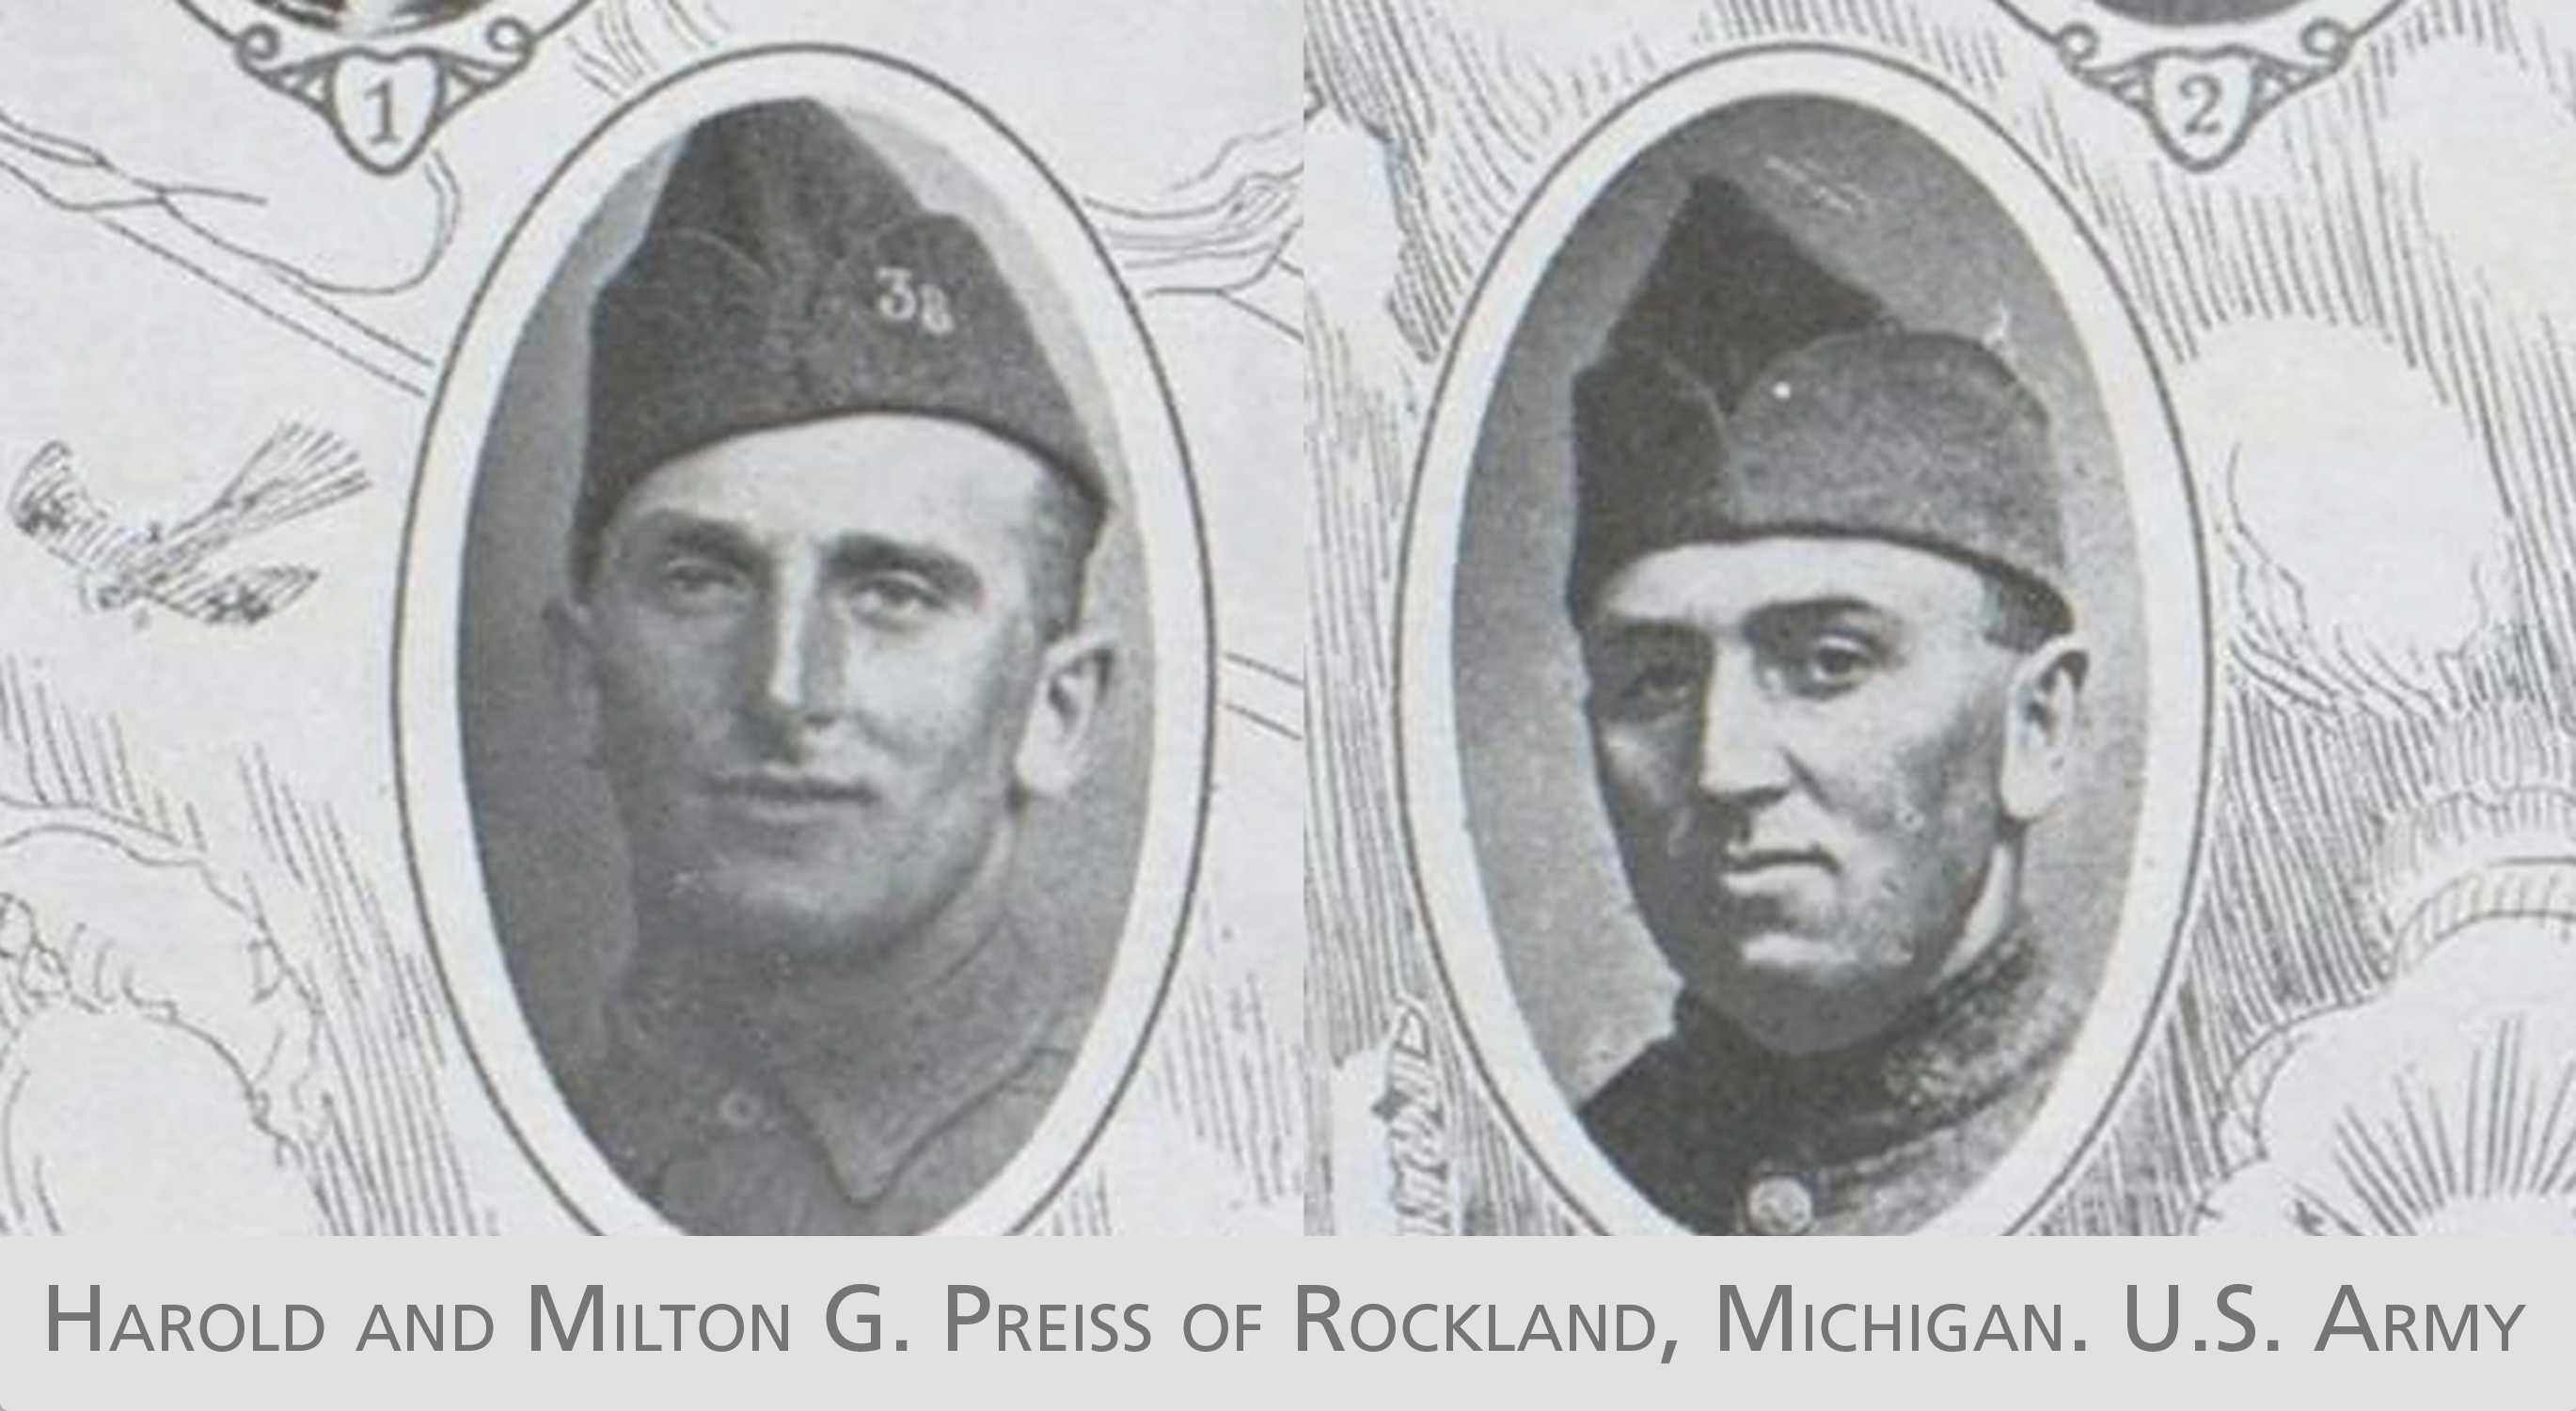 Headshots of two World War I U.S. Army soldiers are shown side by side. Sketches of clouds and birds frame them. Along the bottom border, a label reads "Harold and Milton G. Preiss of Rockland, Michigan. U.S. Army"